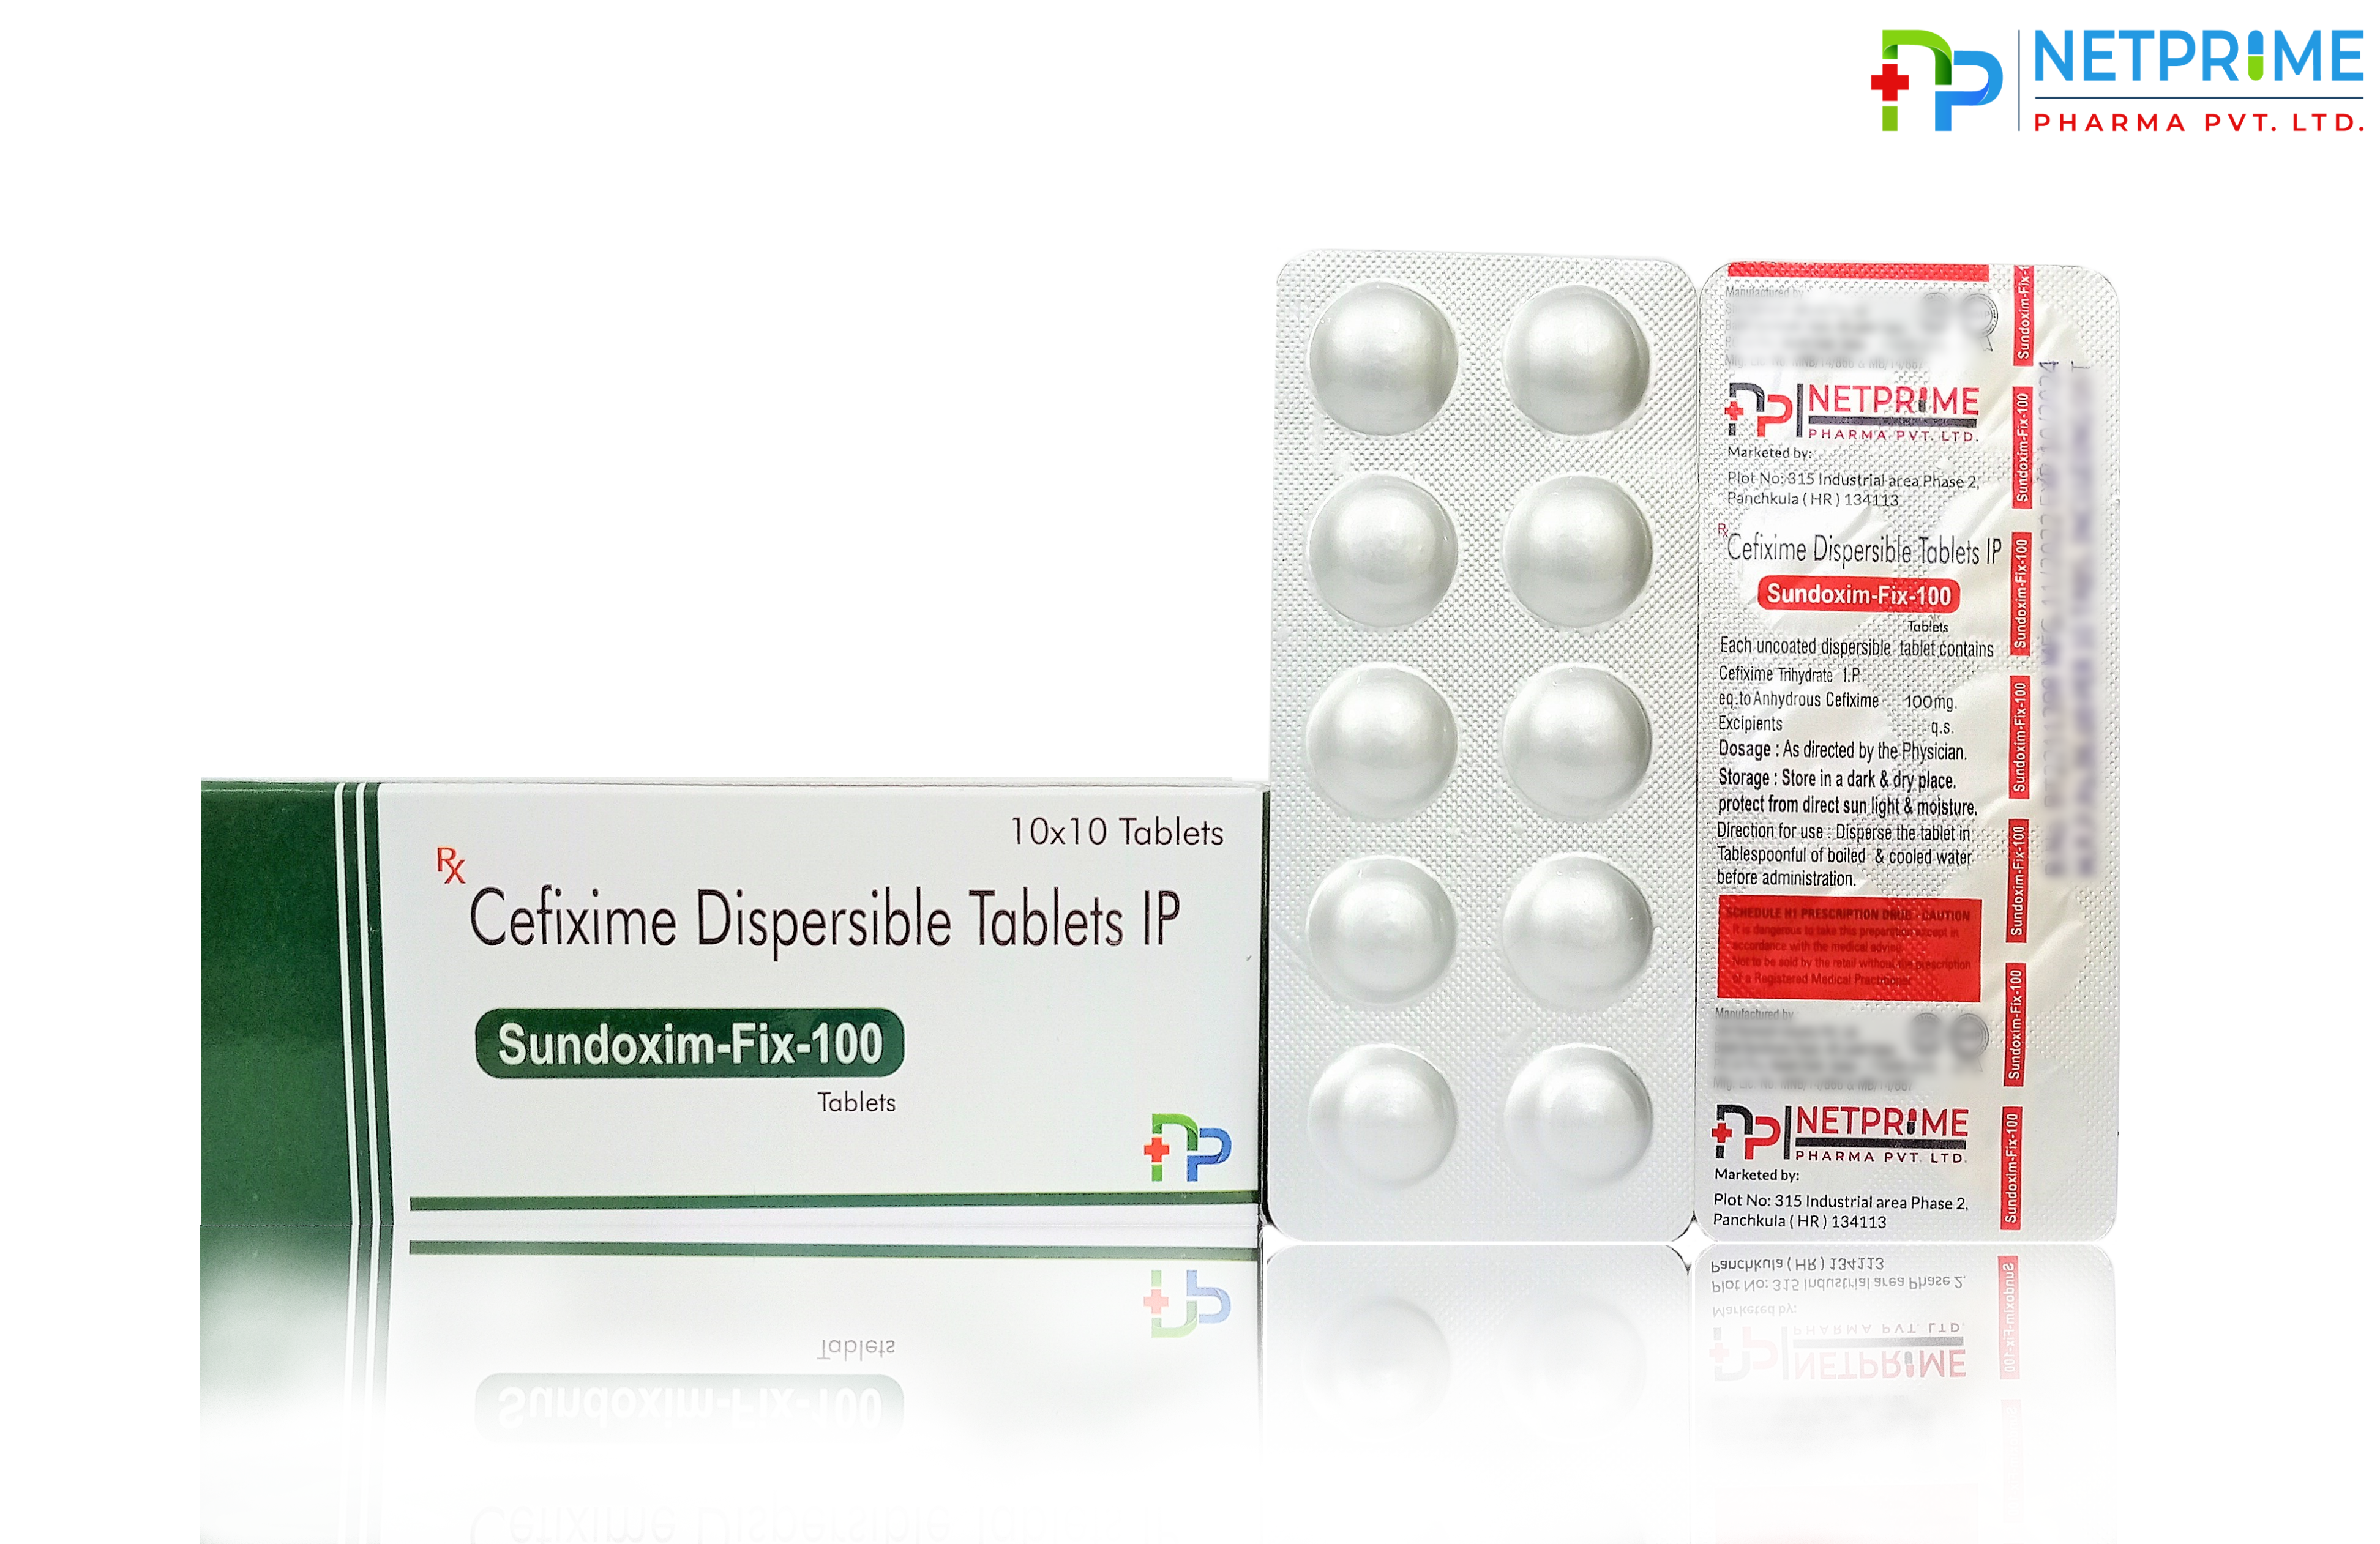 Cefixime D.T. 100 mg Tablets